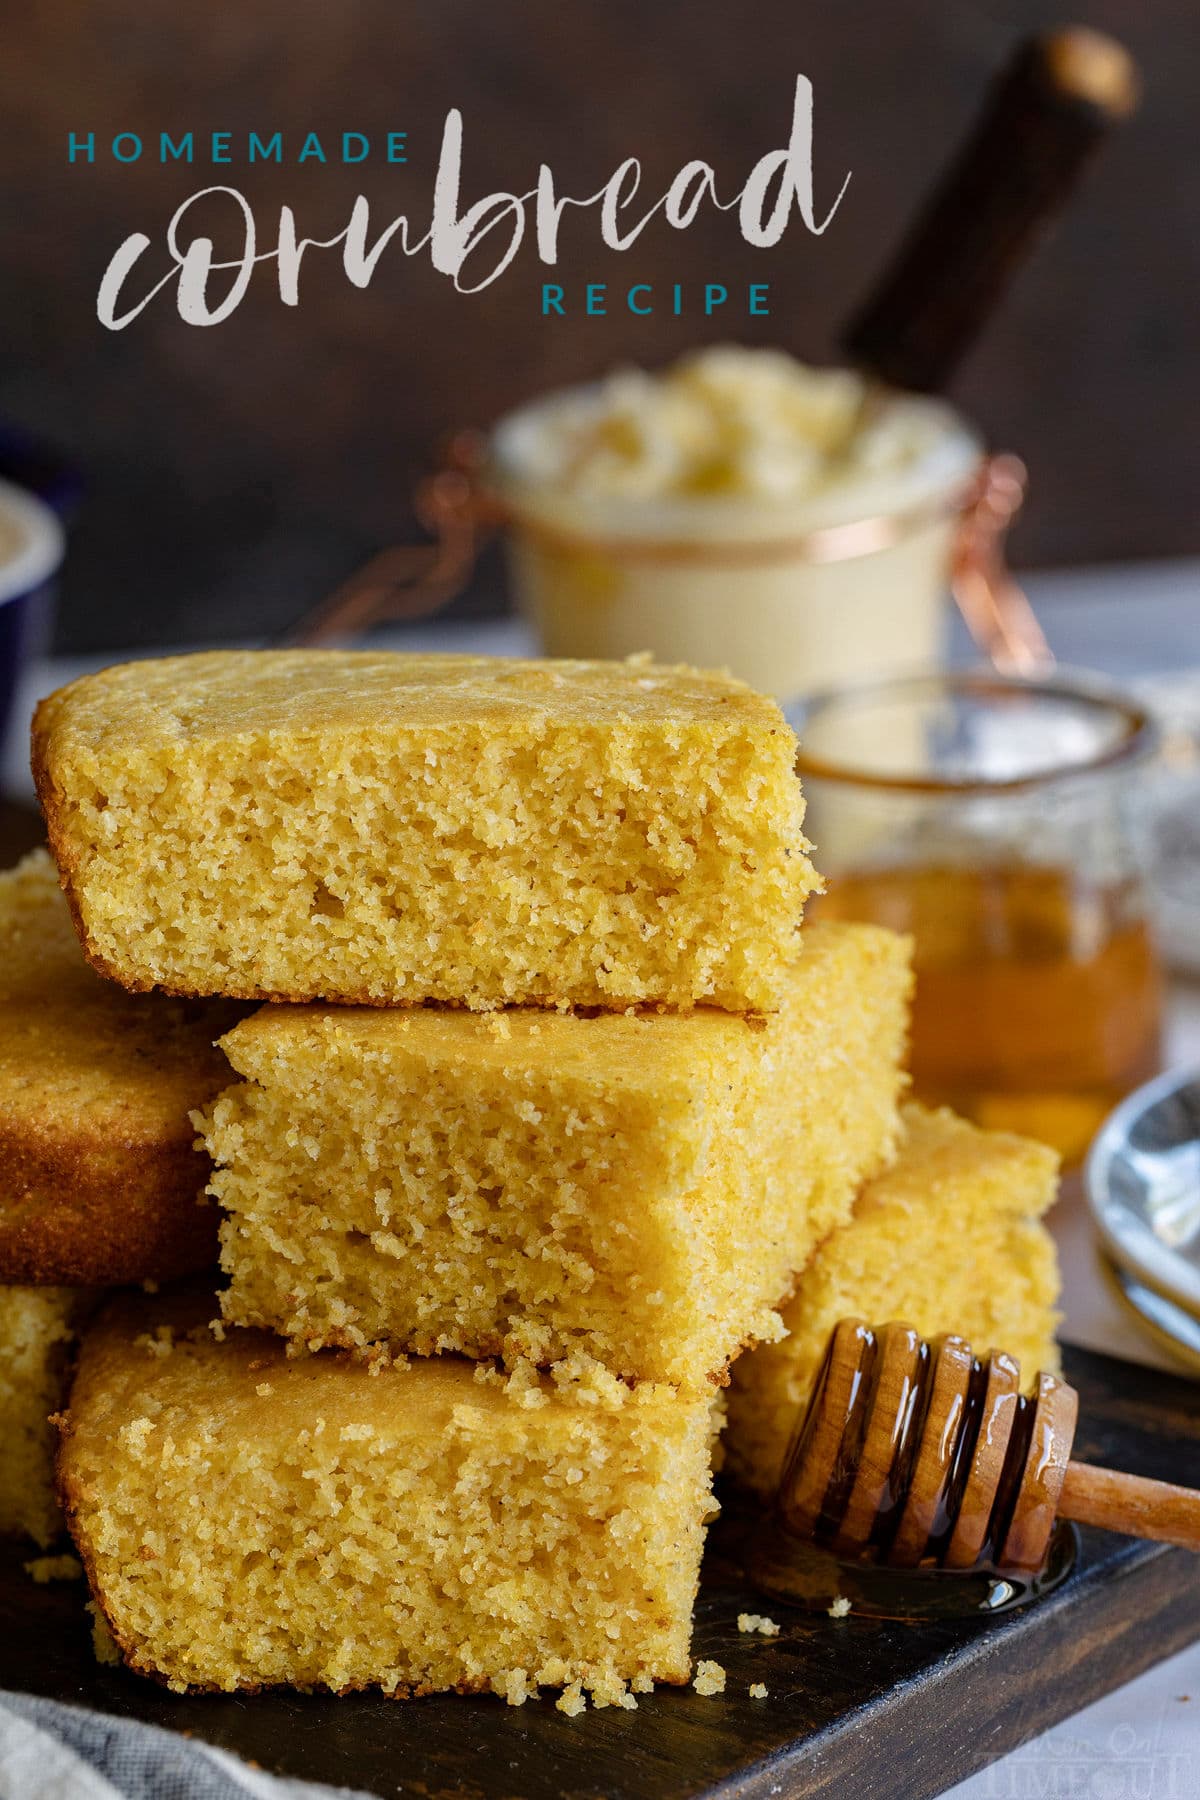 https://www.momontimeout.com/wp-content/uploads/2020/03/homemade-cornbread-recipe-stacked-on-cutting-board-with-TEXT.jpg